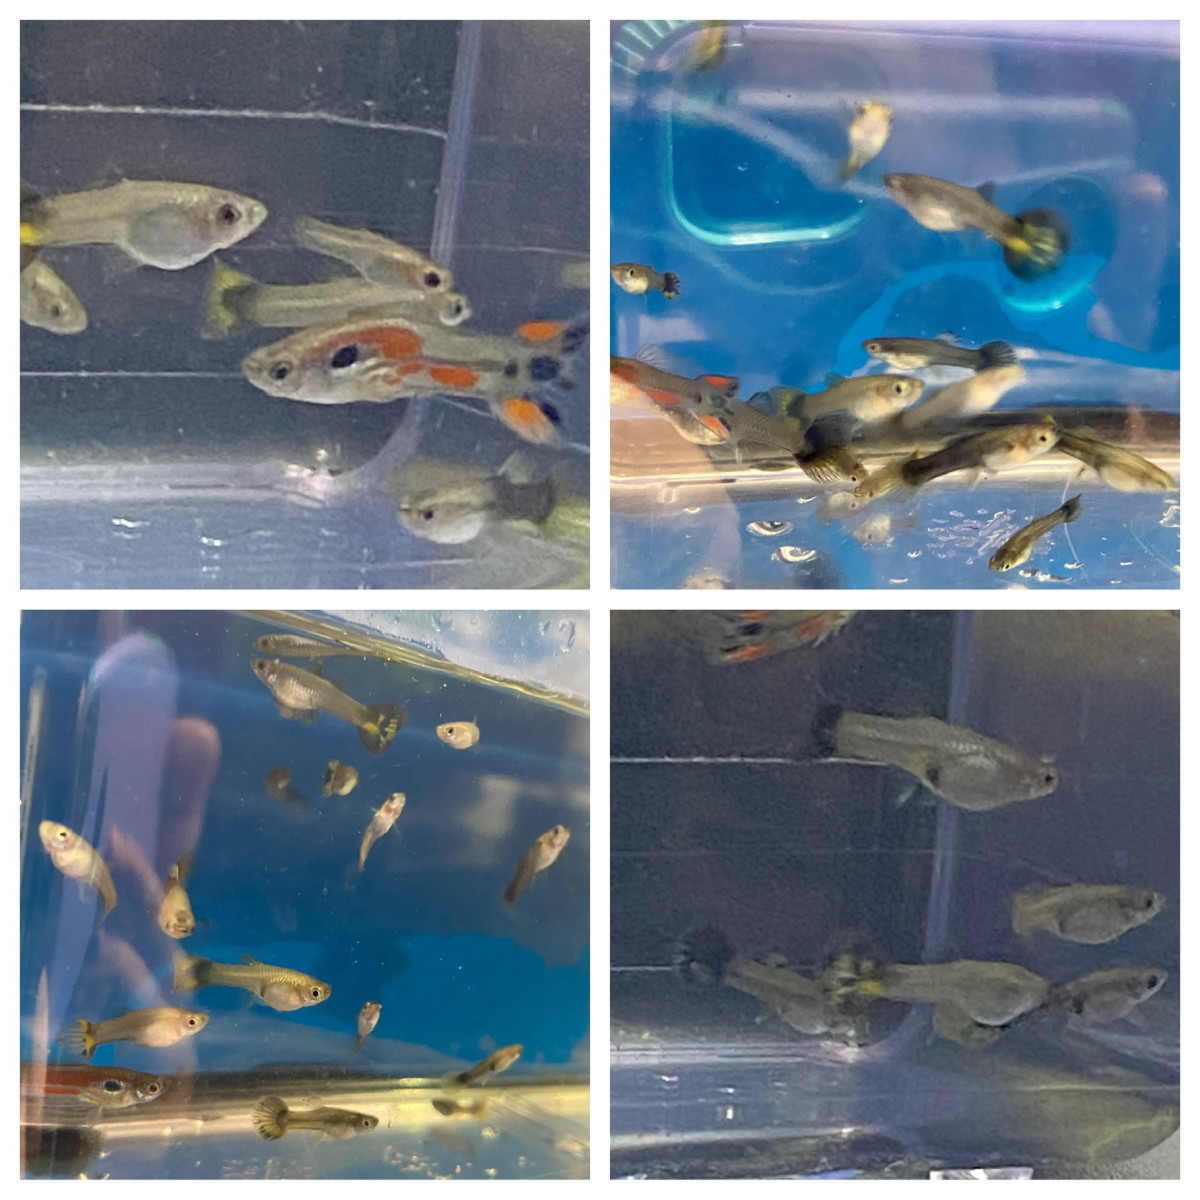 Here are some of my guppies.